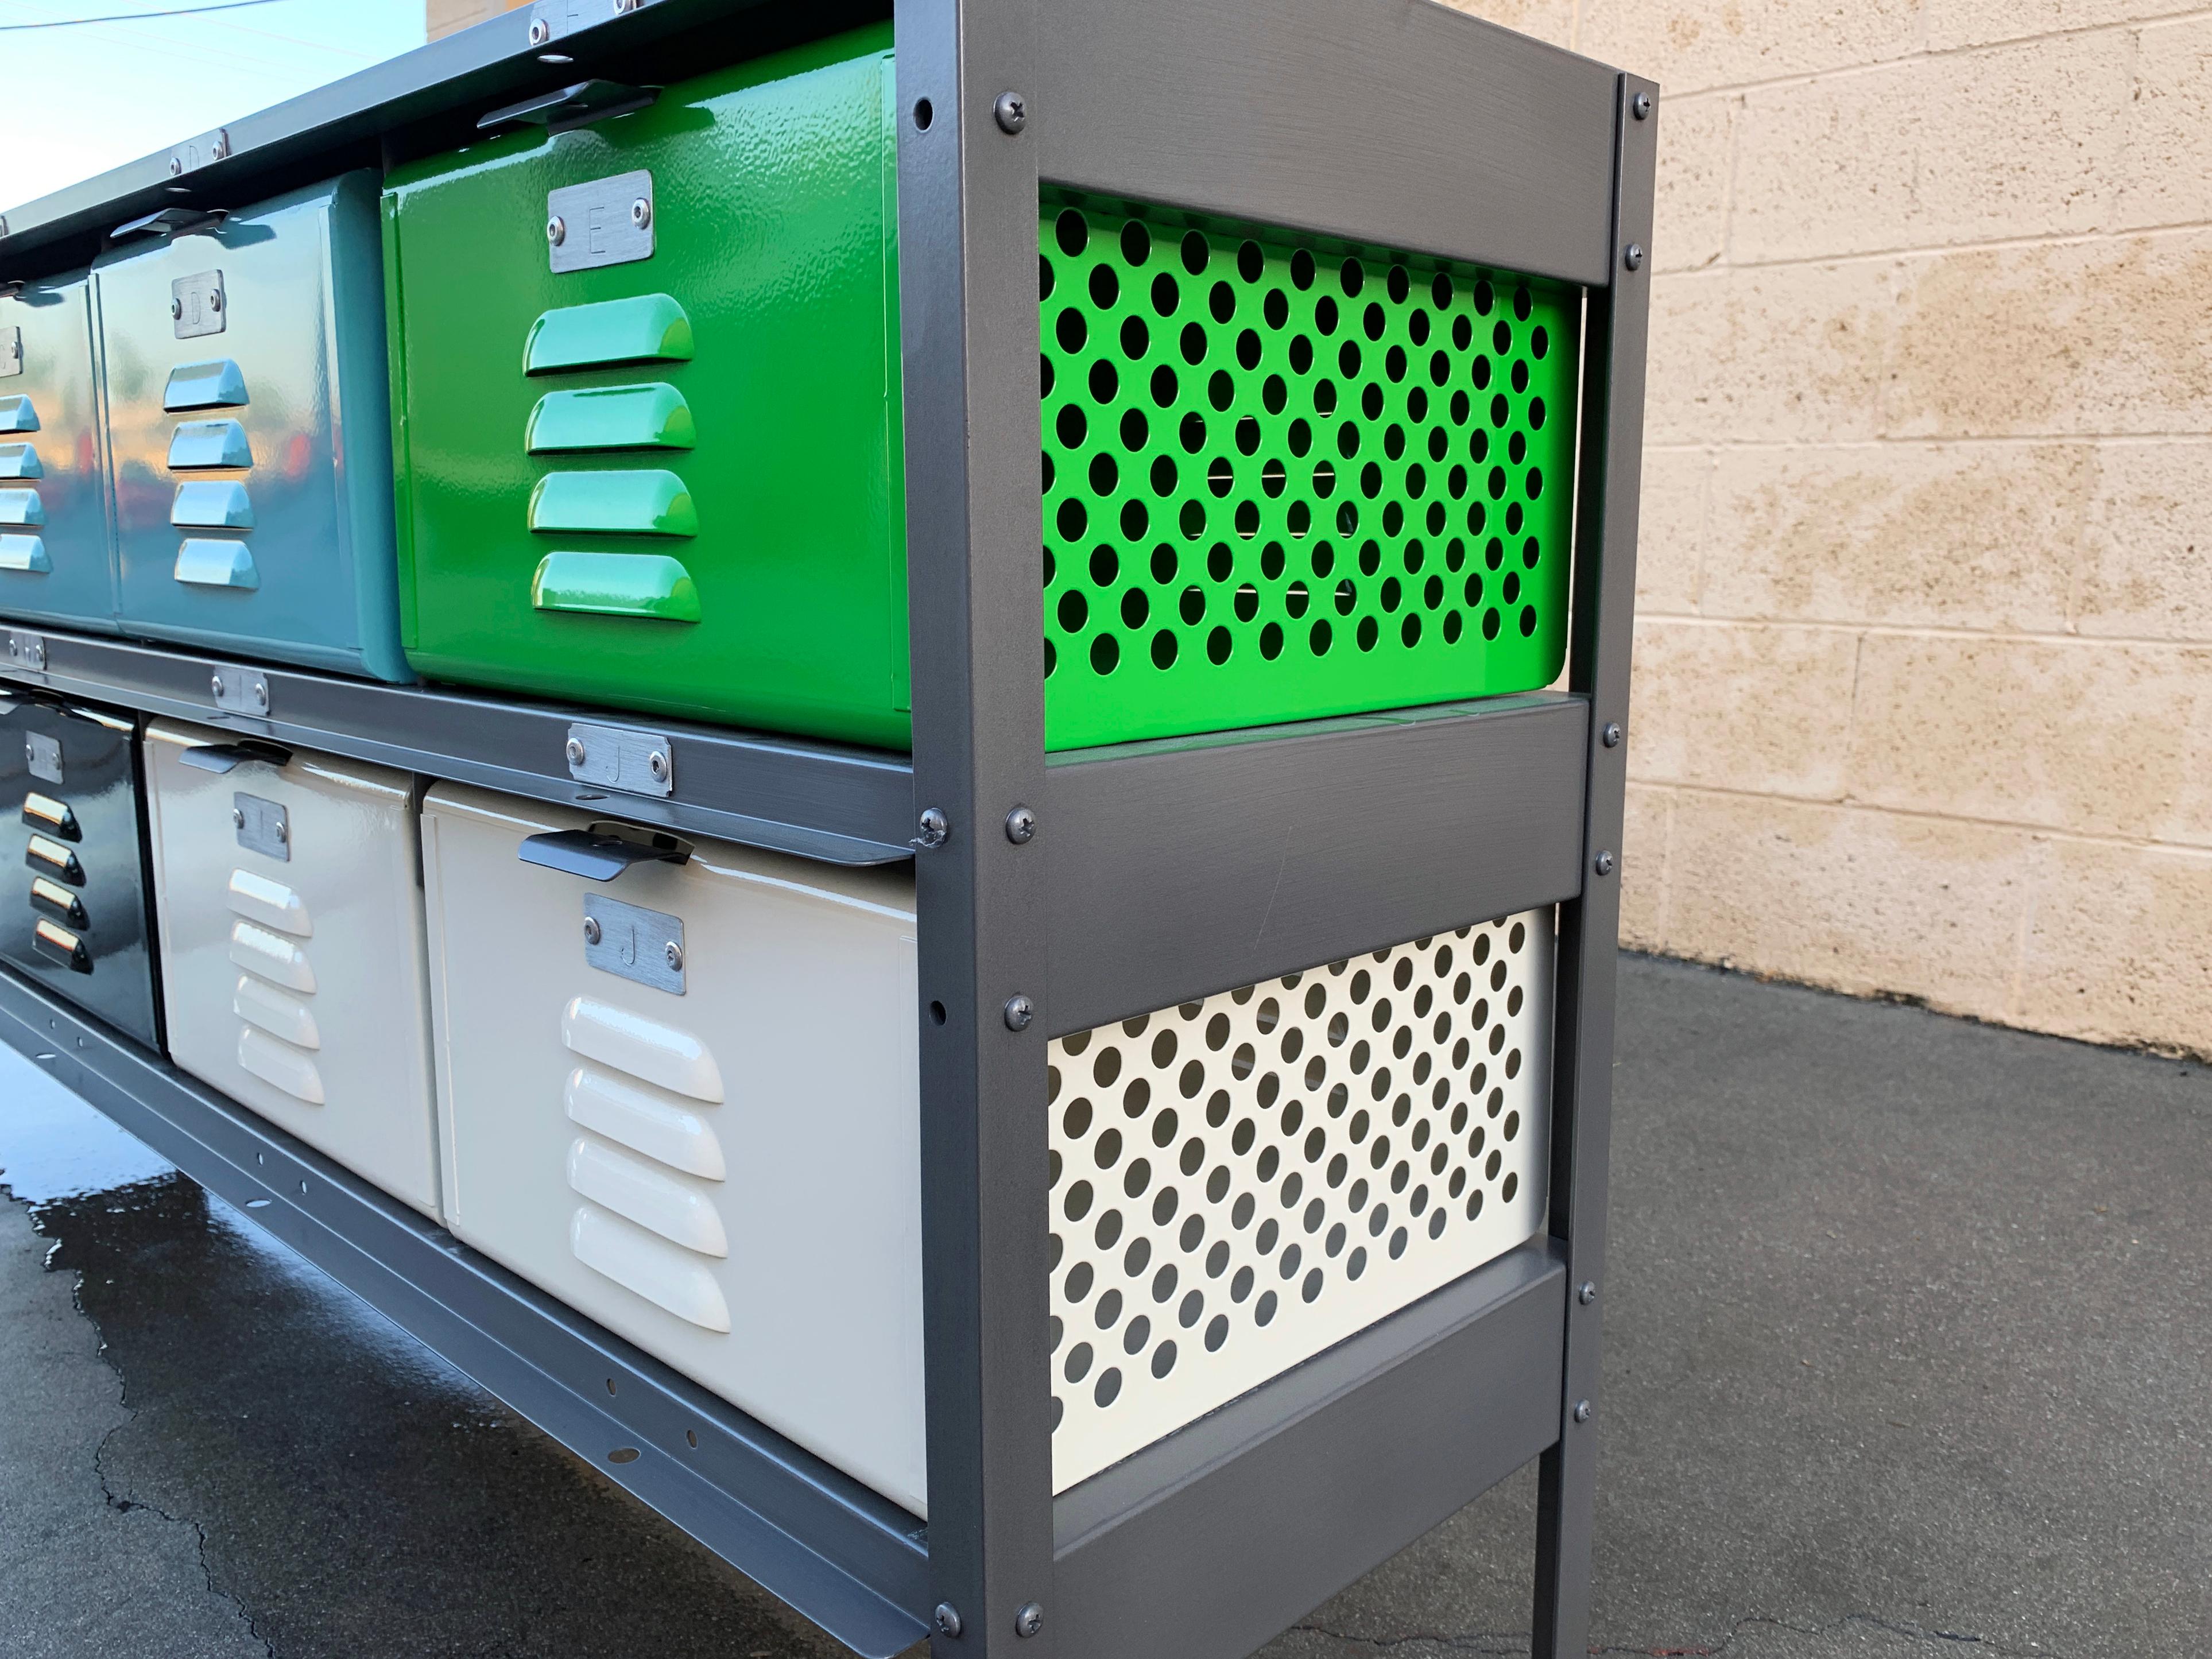 Our all new, custom fabricated 5 wide x 2 high locker basket unit is inspired by those of the 1950s and 1960s. Made to order in a range of fun colors and practical configurations. As pictured basket gloss colors include: Peach (RAL3012), Lime